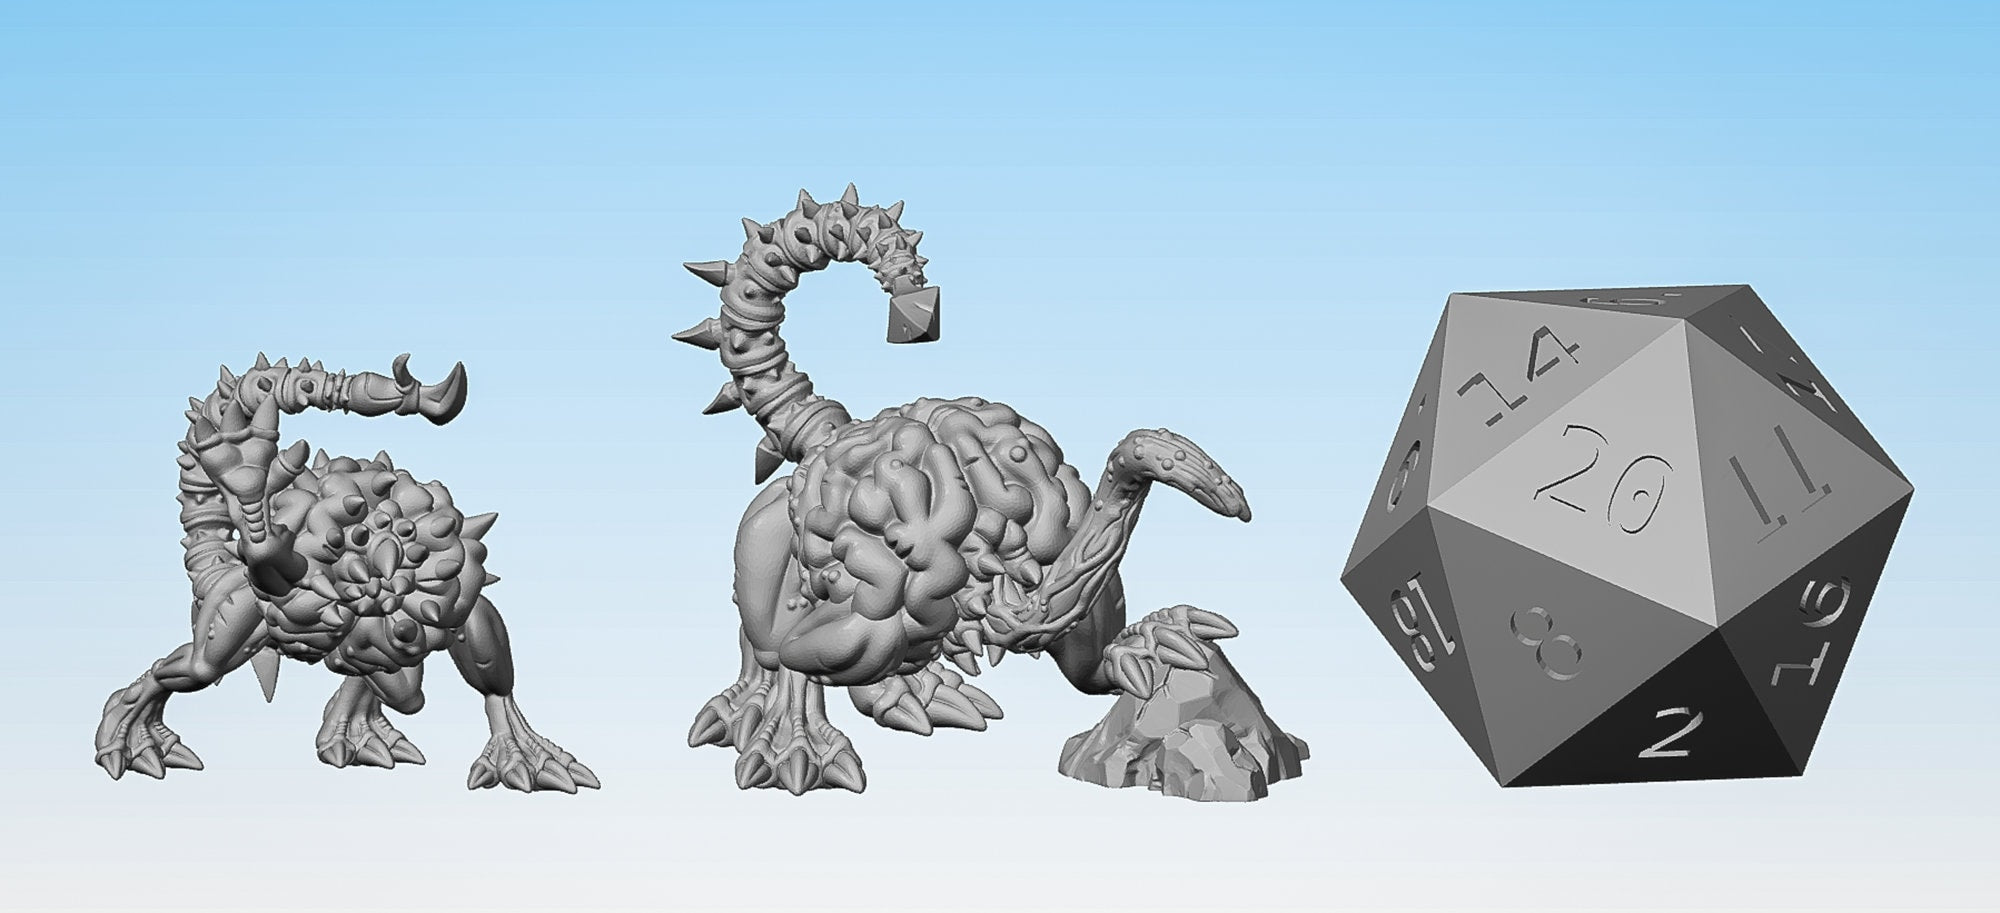 INTELLECT DEVOURER, 2 for 1 | 3D Print Mini | Resin-Role Playing Miniatures